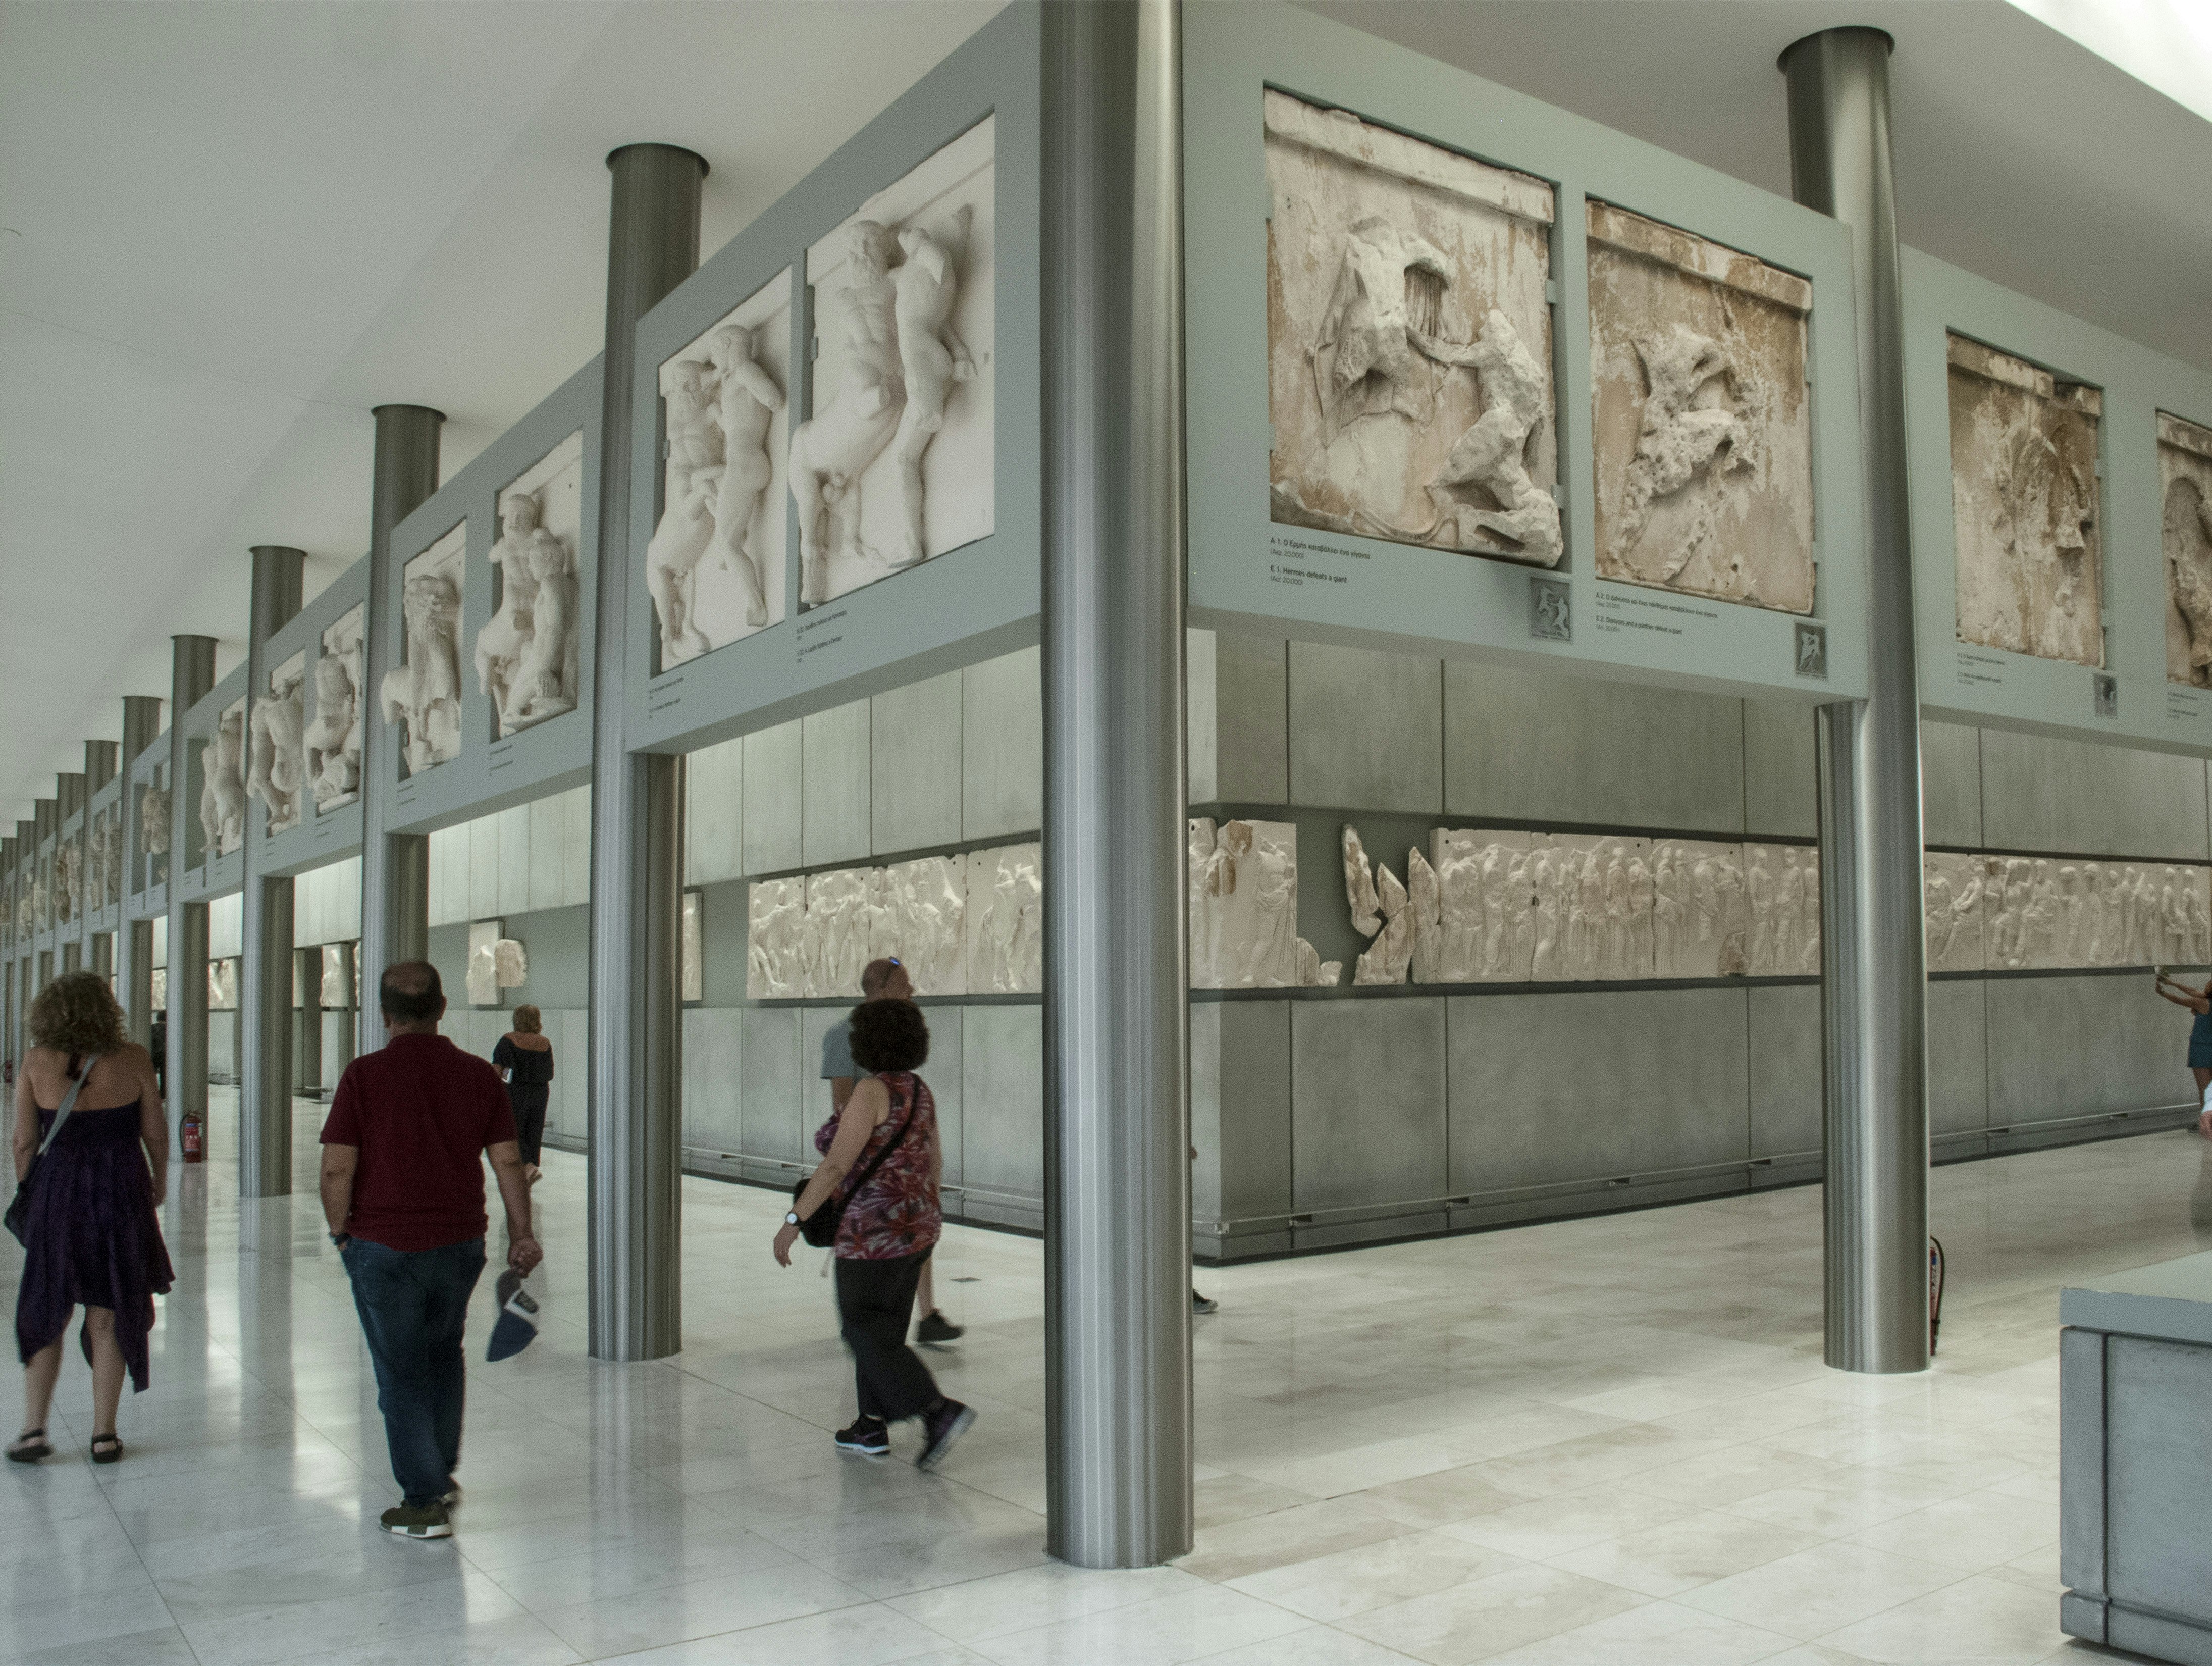 Tourists stroll around the perpendicular walls of the Acropolis Museum lined with some of the remaining friezes which were not removed by Elgin